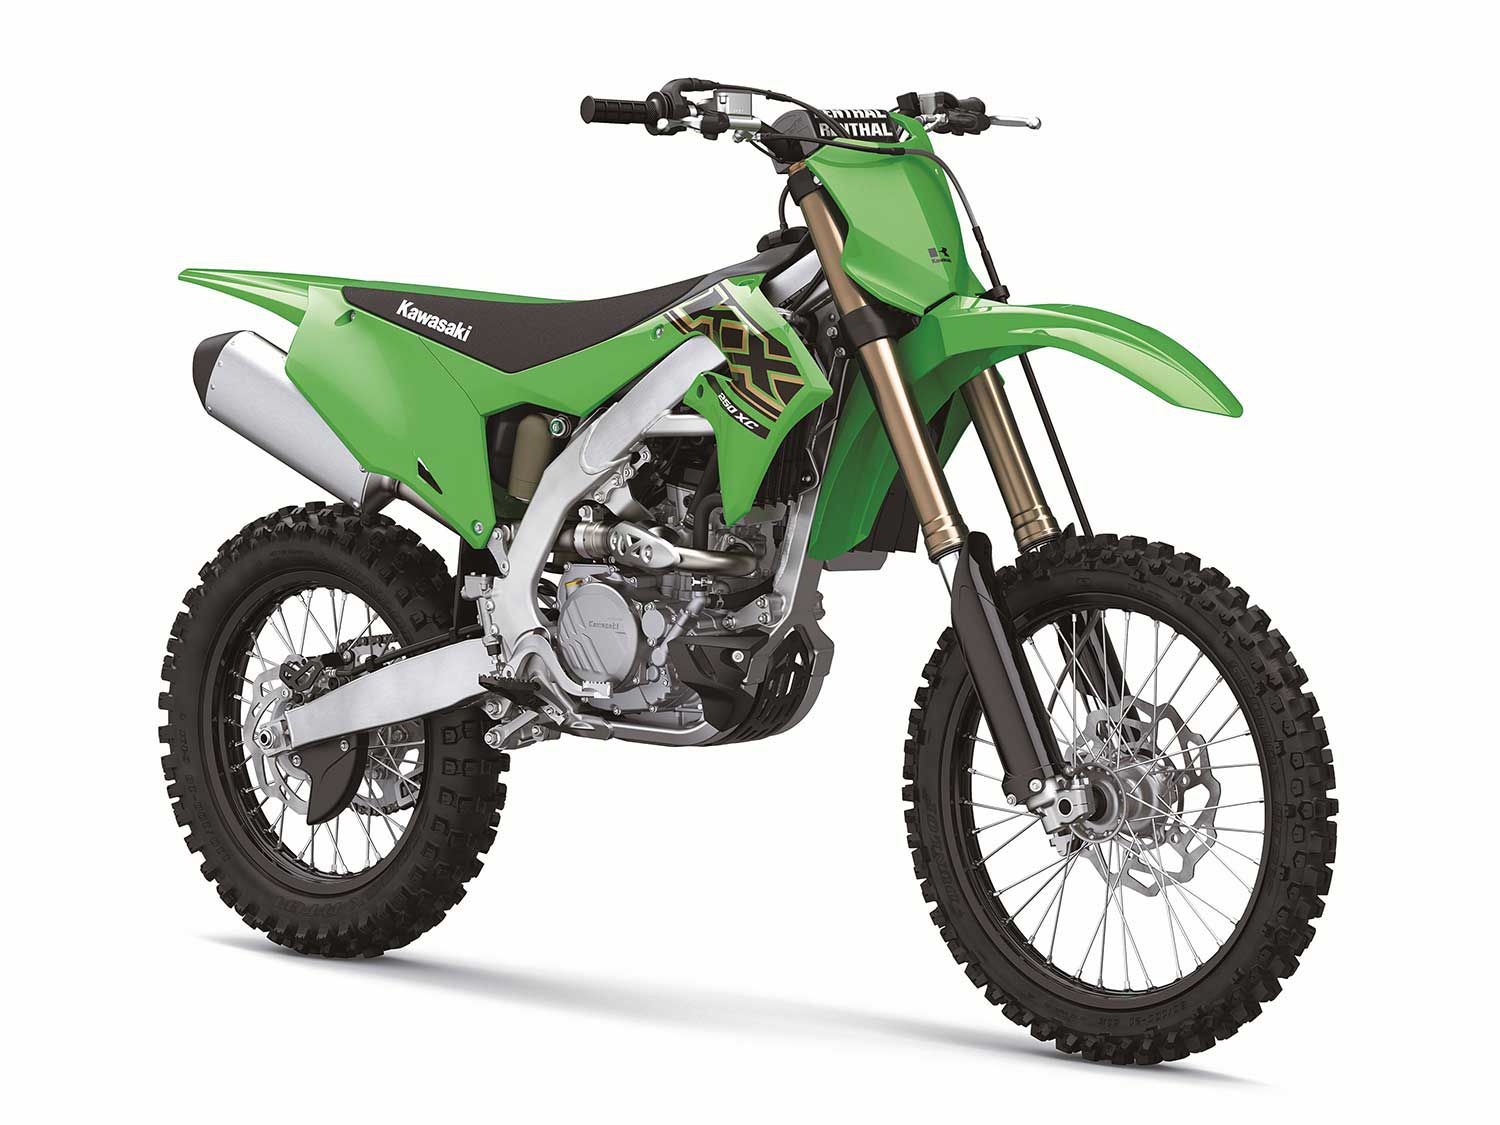 2021 Kawasaki And Cross-Country Models Released | Rider